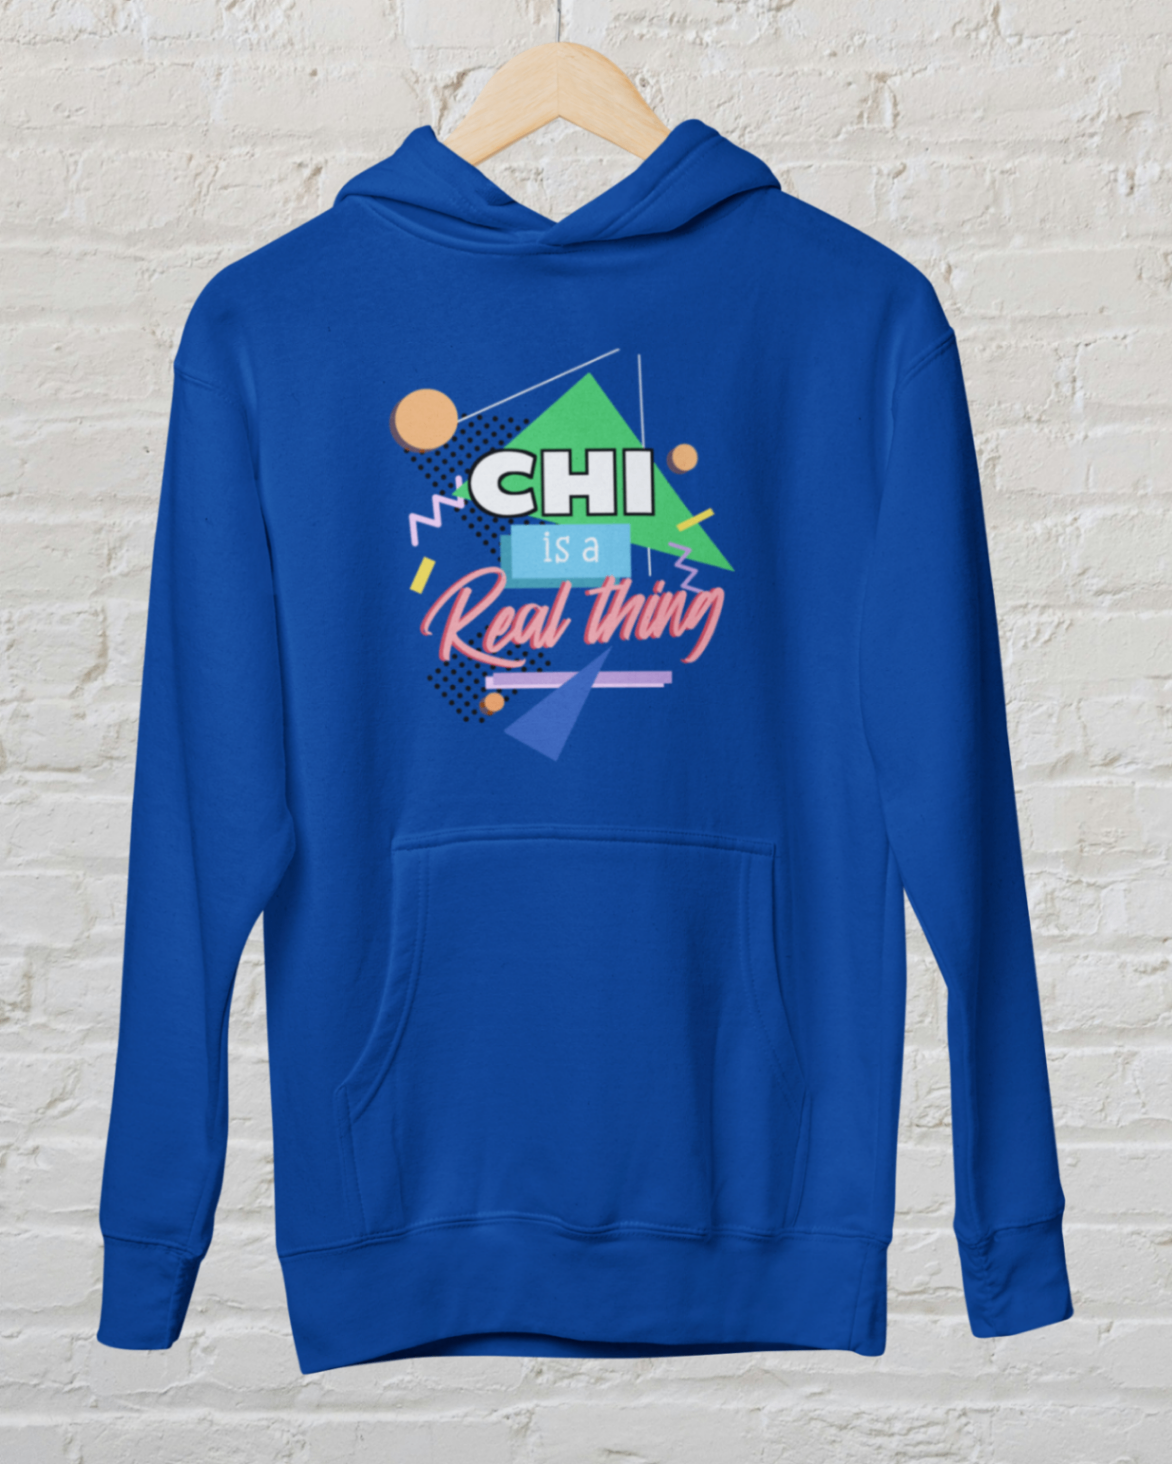 Hoodie royal blue 'Chi is a real thing' design white brick backround